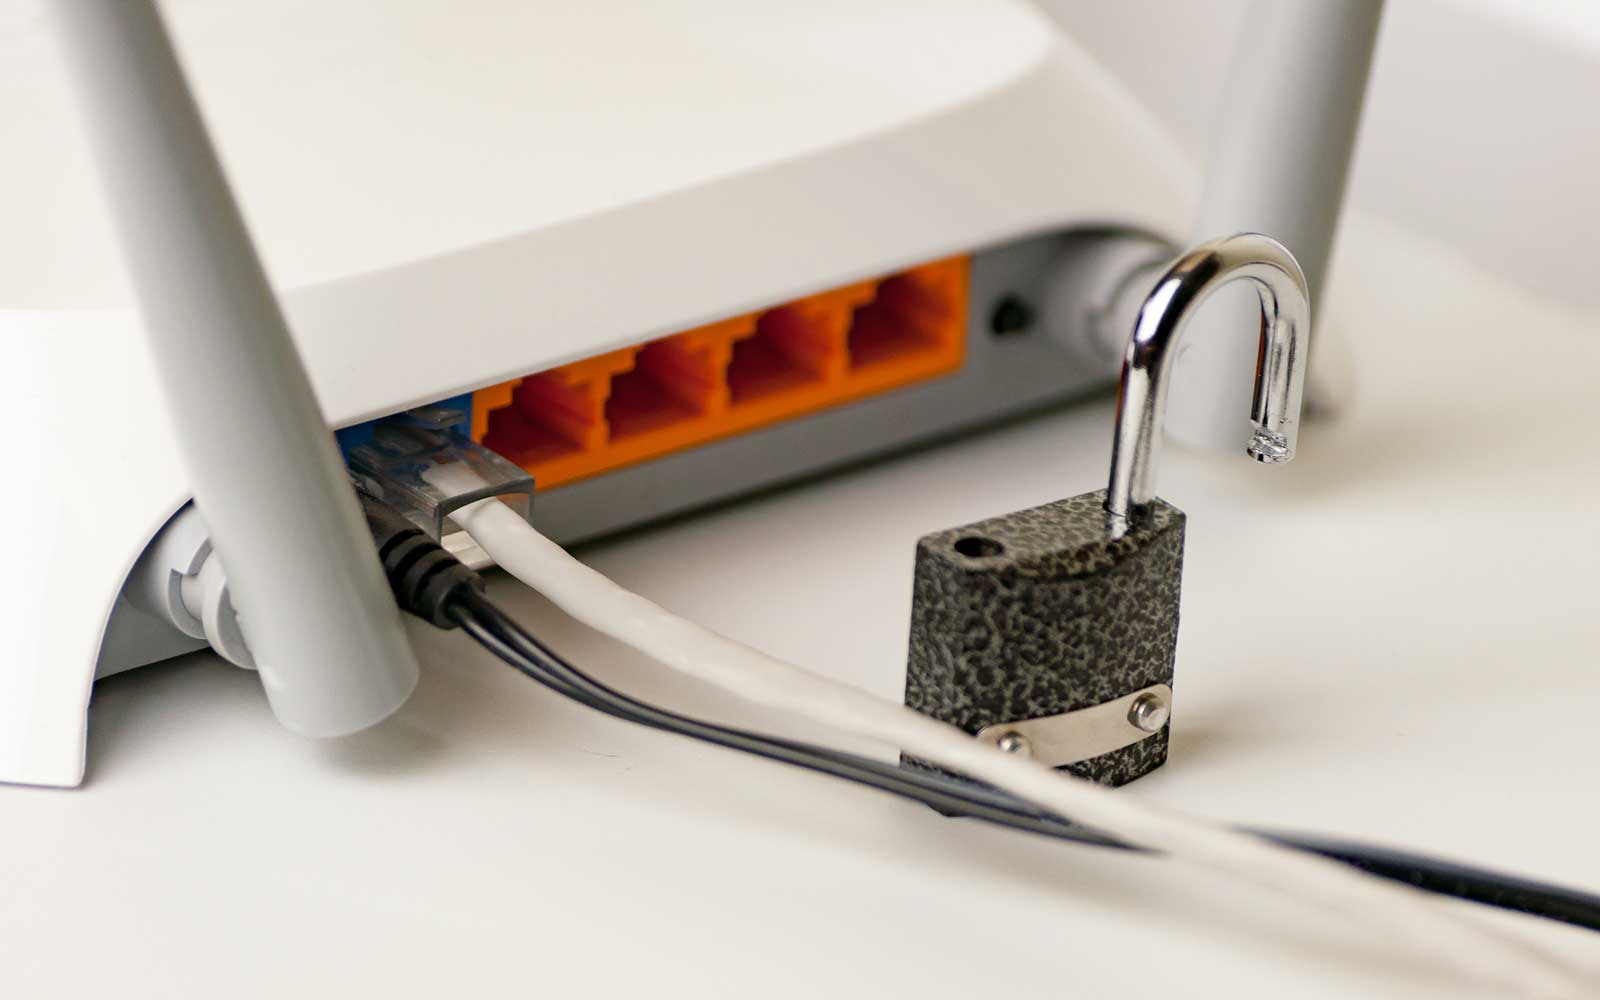 how to tell if someone hacked your router feature